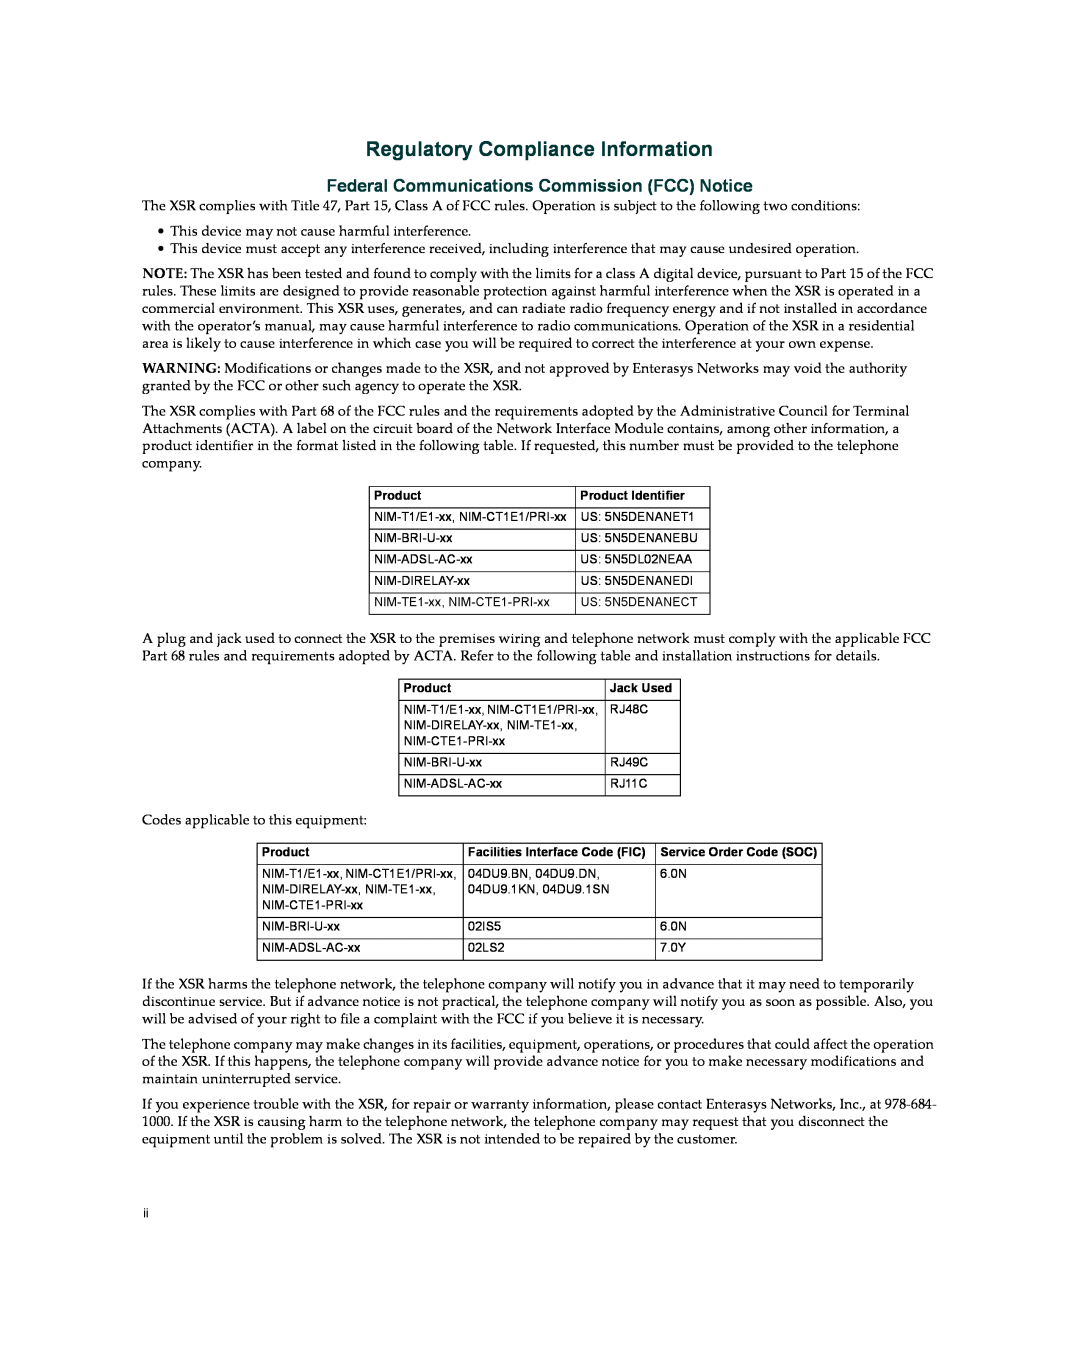 Enterasys Networks XSR-3020 manual Regulatory Compliance Information, Federal Communications Commission FCC Notice 